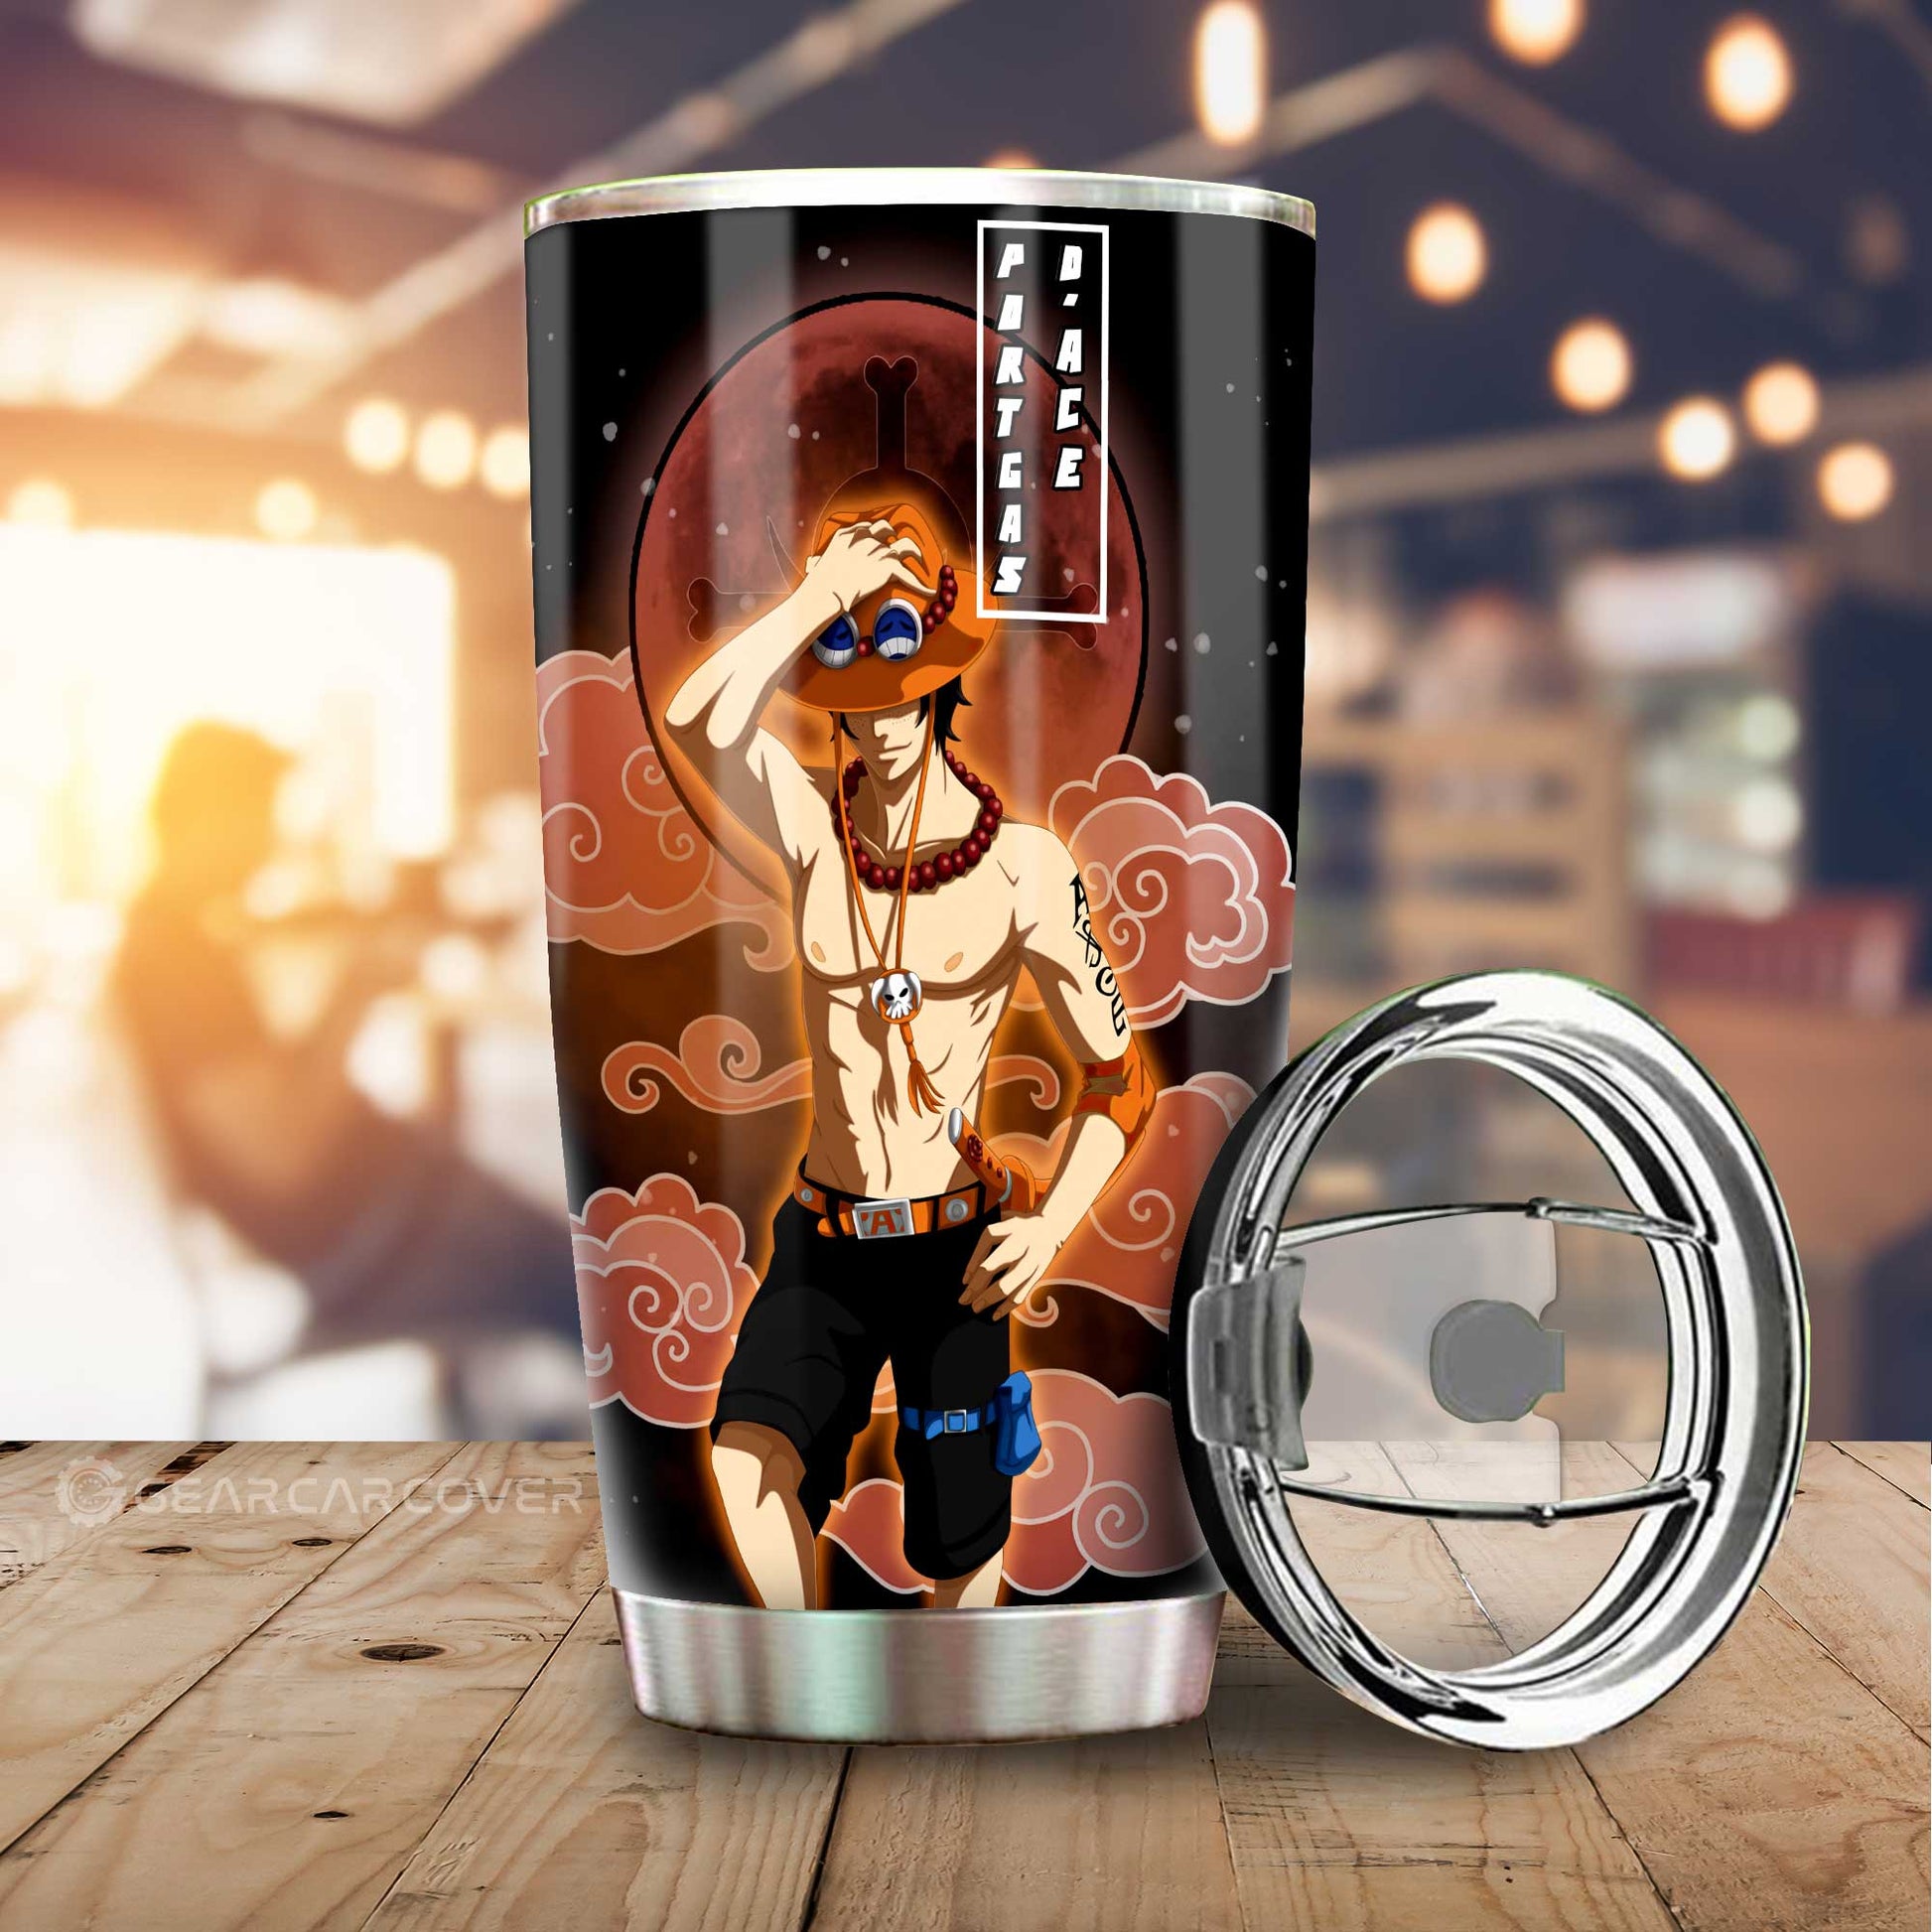 Portgas D. Ace Tumbler Cup Custom One Piece Anime Car Accessories For Anime Fans - Gearcarcover - 1